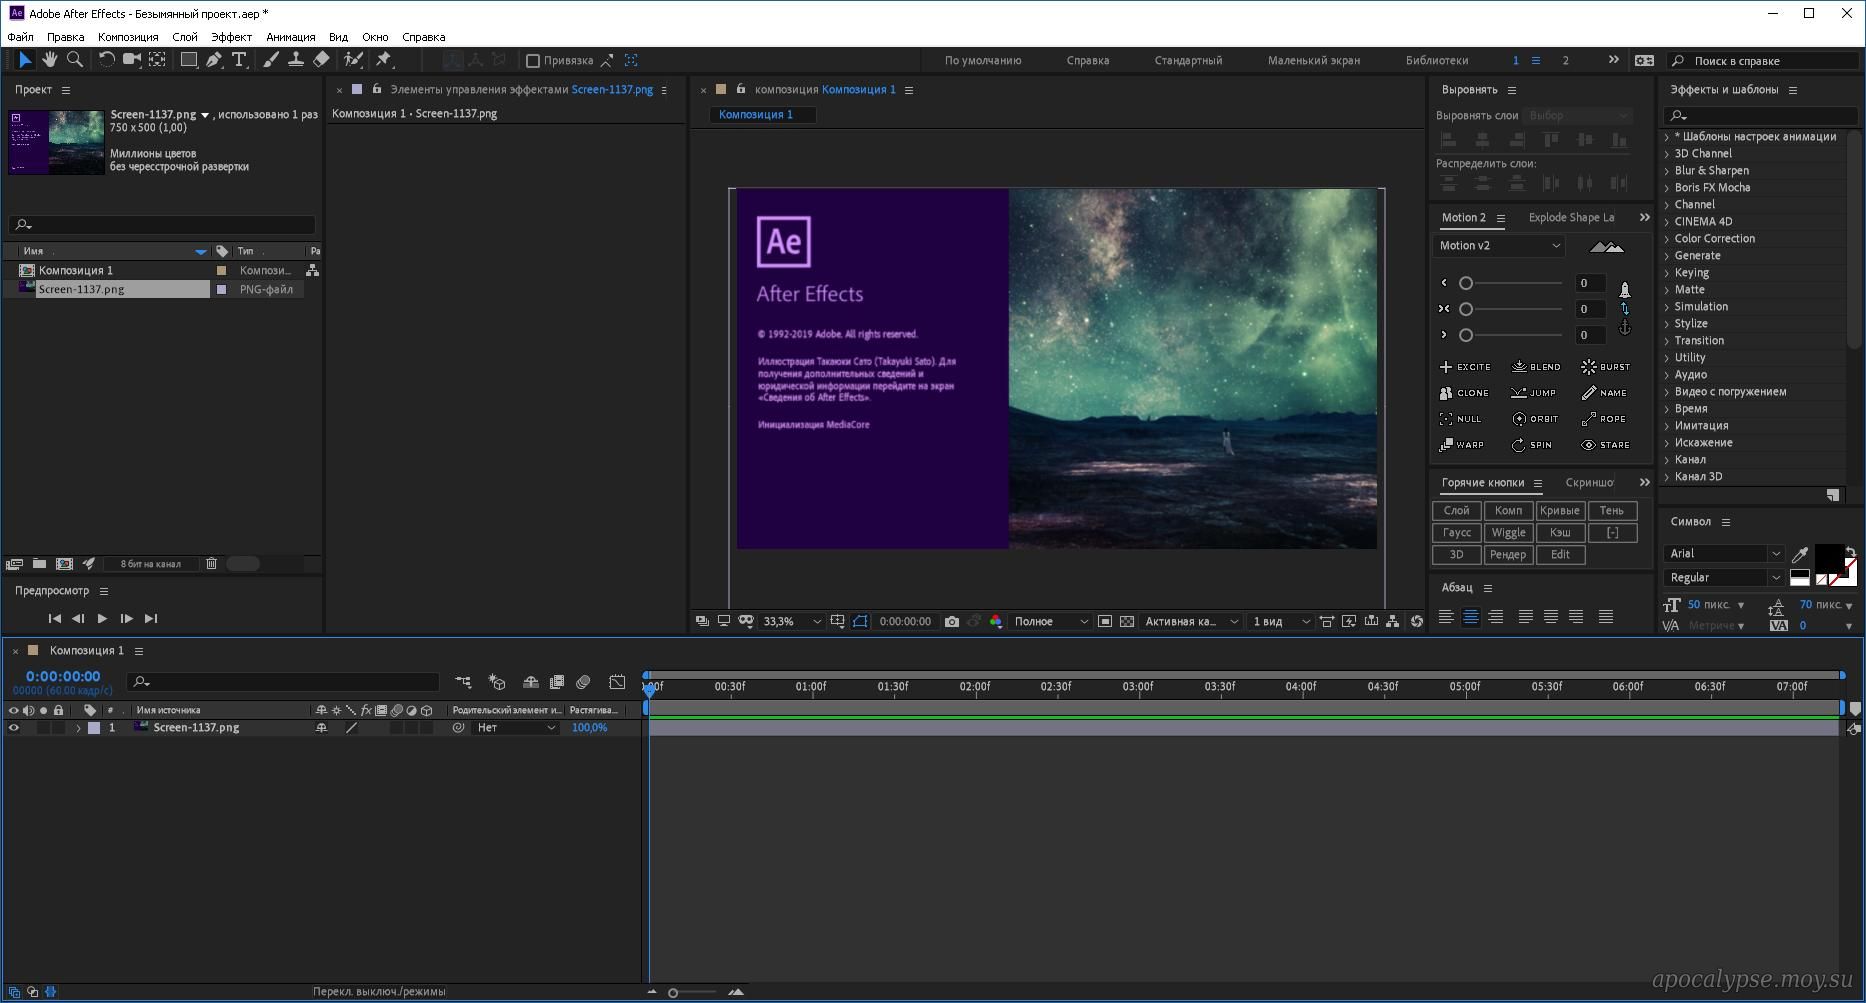 After effects работа. Adobe after Effects cc 2019. Интерфейс Adobe after Effects 2019. Adobe after Effects 2020. Adobe after Effects cc 2021.